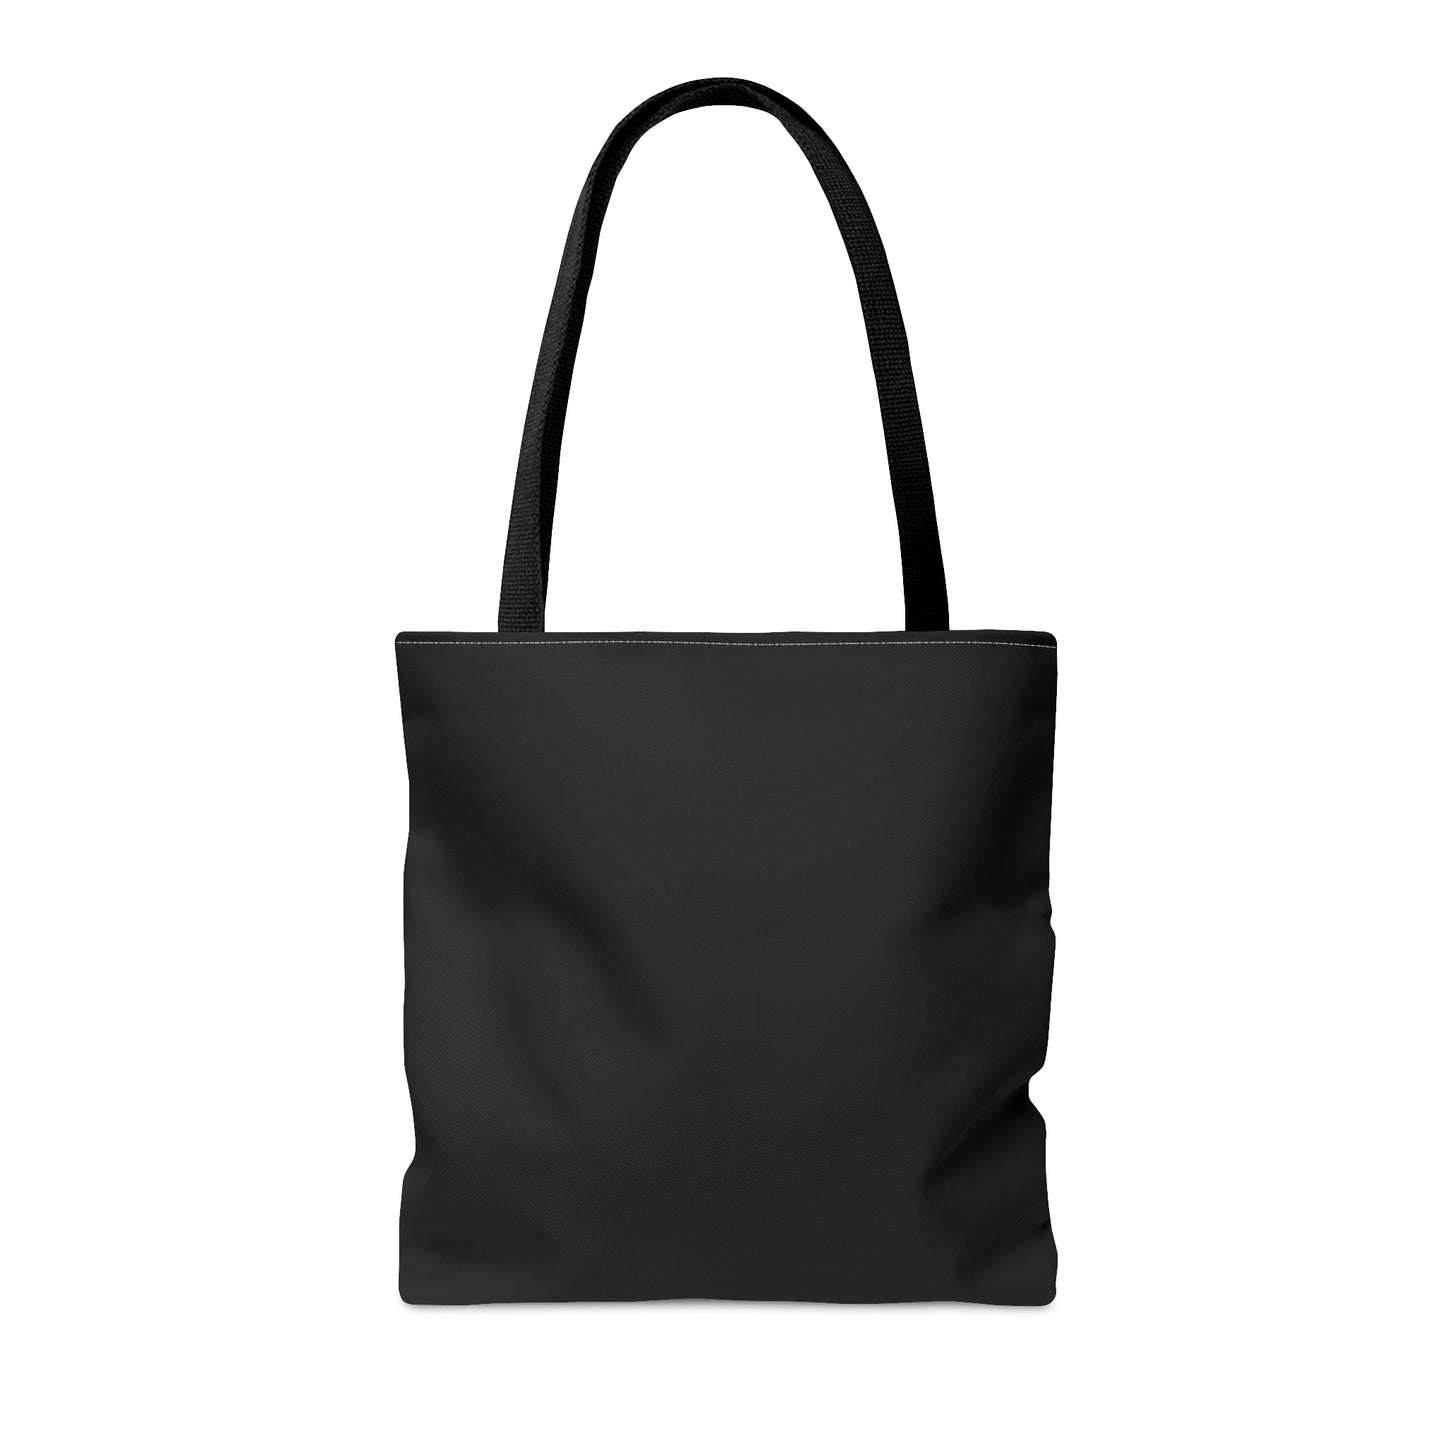 Child Of God Touch Not His Anointed Christian Tote Bag Printify